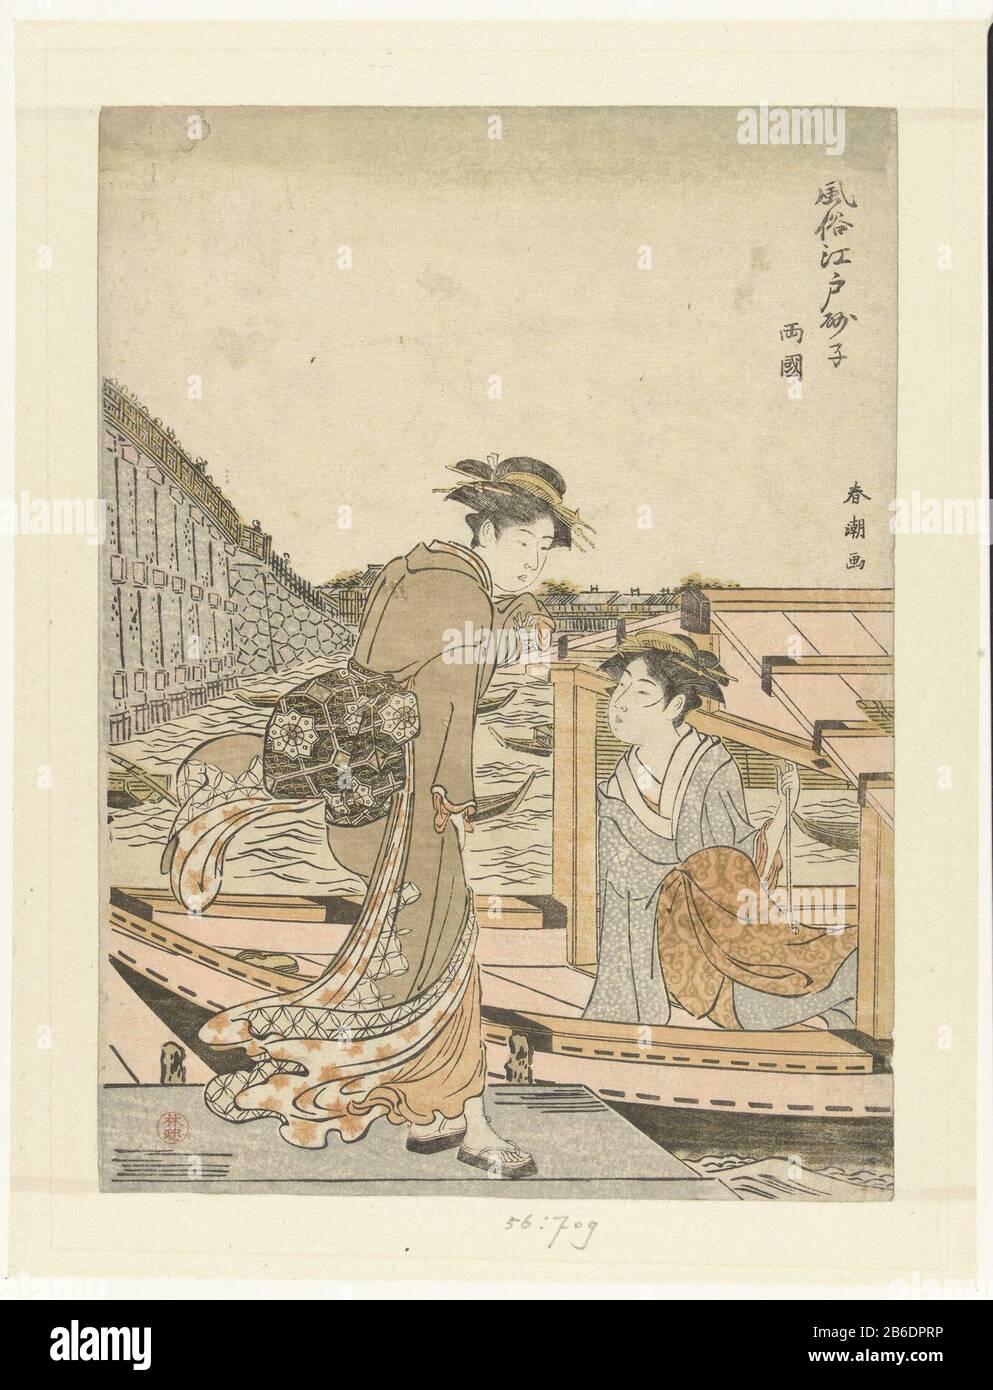 In the Ryogoku bridge Ryogoku (title object) Fuzoku Edo sunago (series title object) Young woman on scaffolding at the Roygoku bridge, talking to woman with pipe in his left hand, sitting in boat; in the background boats on the river Sumida. Manufacturer : printmaker: Katsukawa Shuncho (listed property) Place manufacture: Japan Date: 1783 - 1787 Physical characteristics: color woodblock; line block in black with color blocks material: paper Technique: color woodblock Dimensions: sheet: H 261 mm (chuban) × b 190 mm Stock Photo